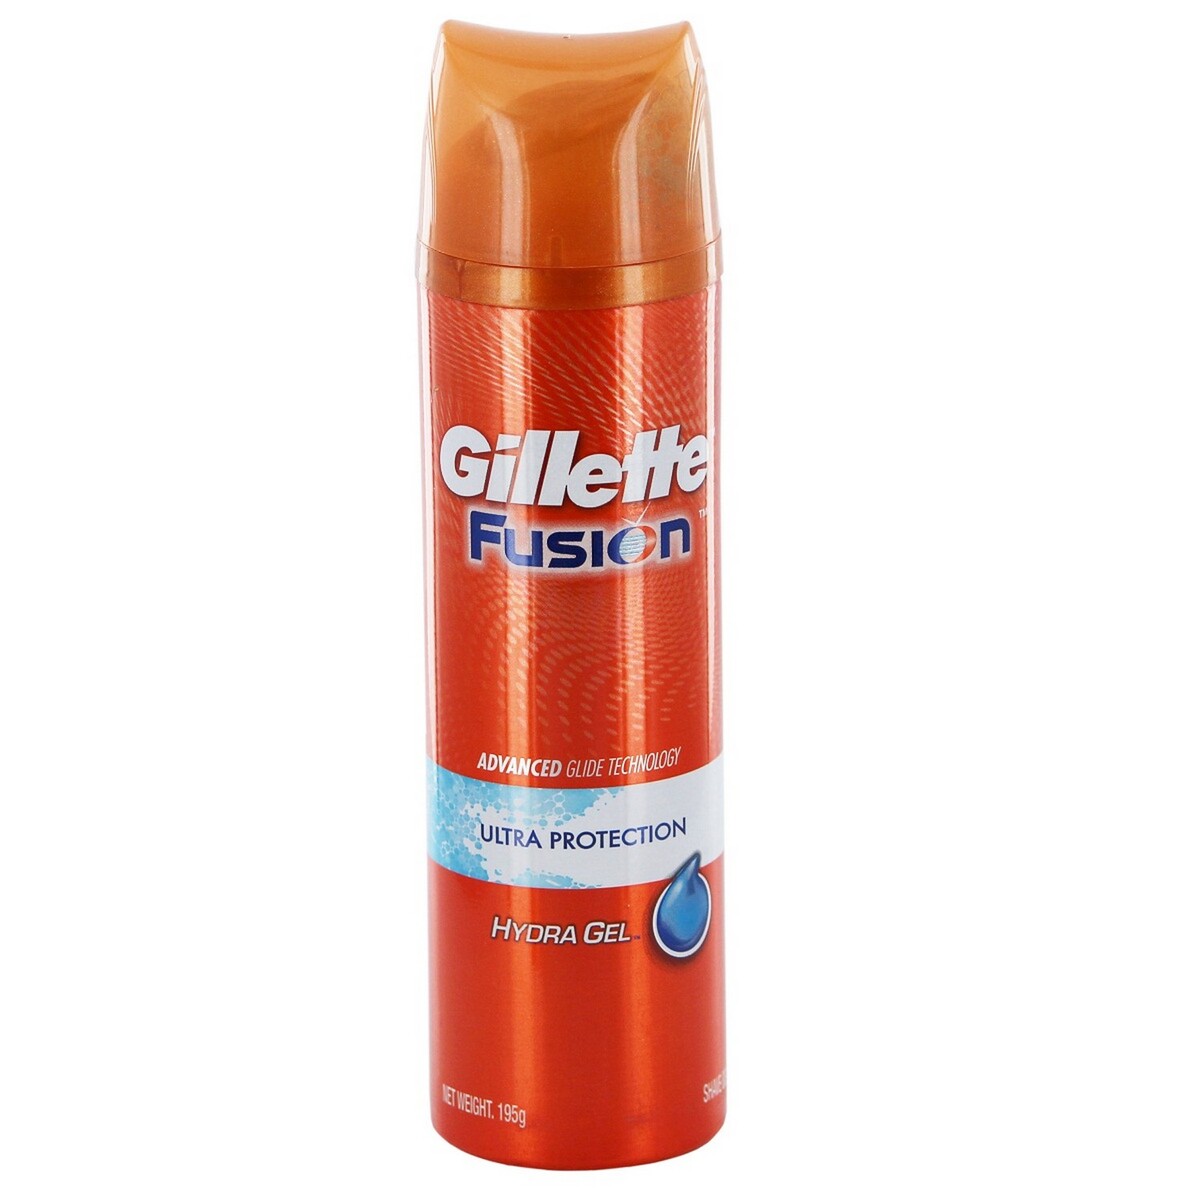 Gillette Shaving Gel Fusion Hydra Ultra Protection 195g